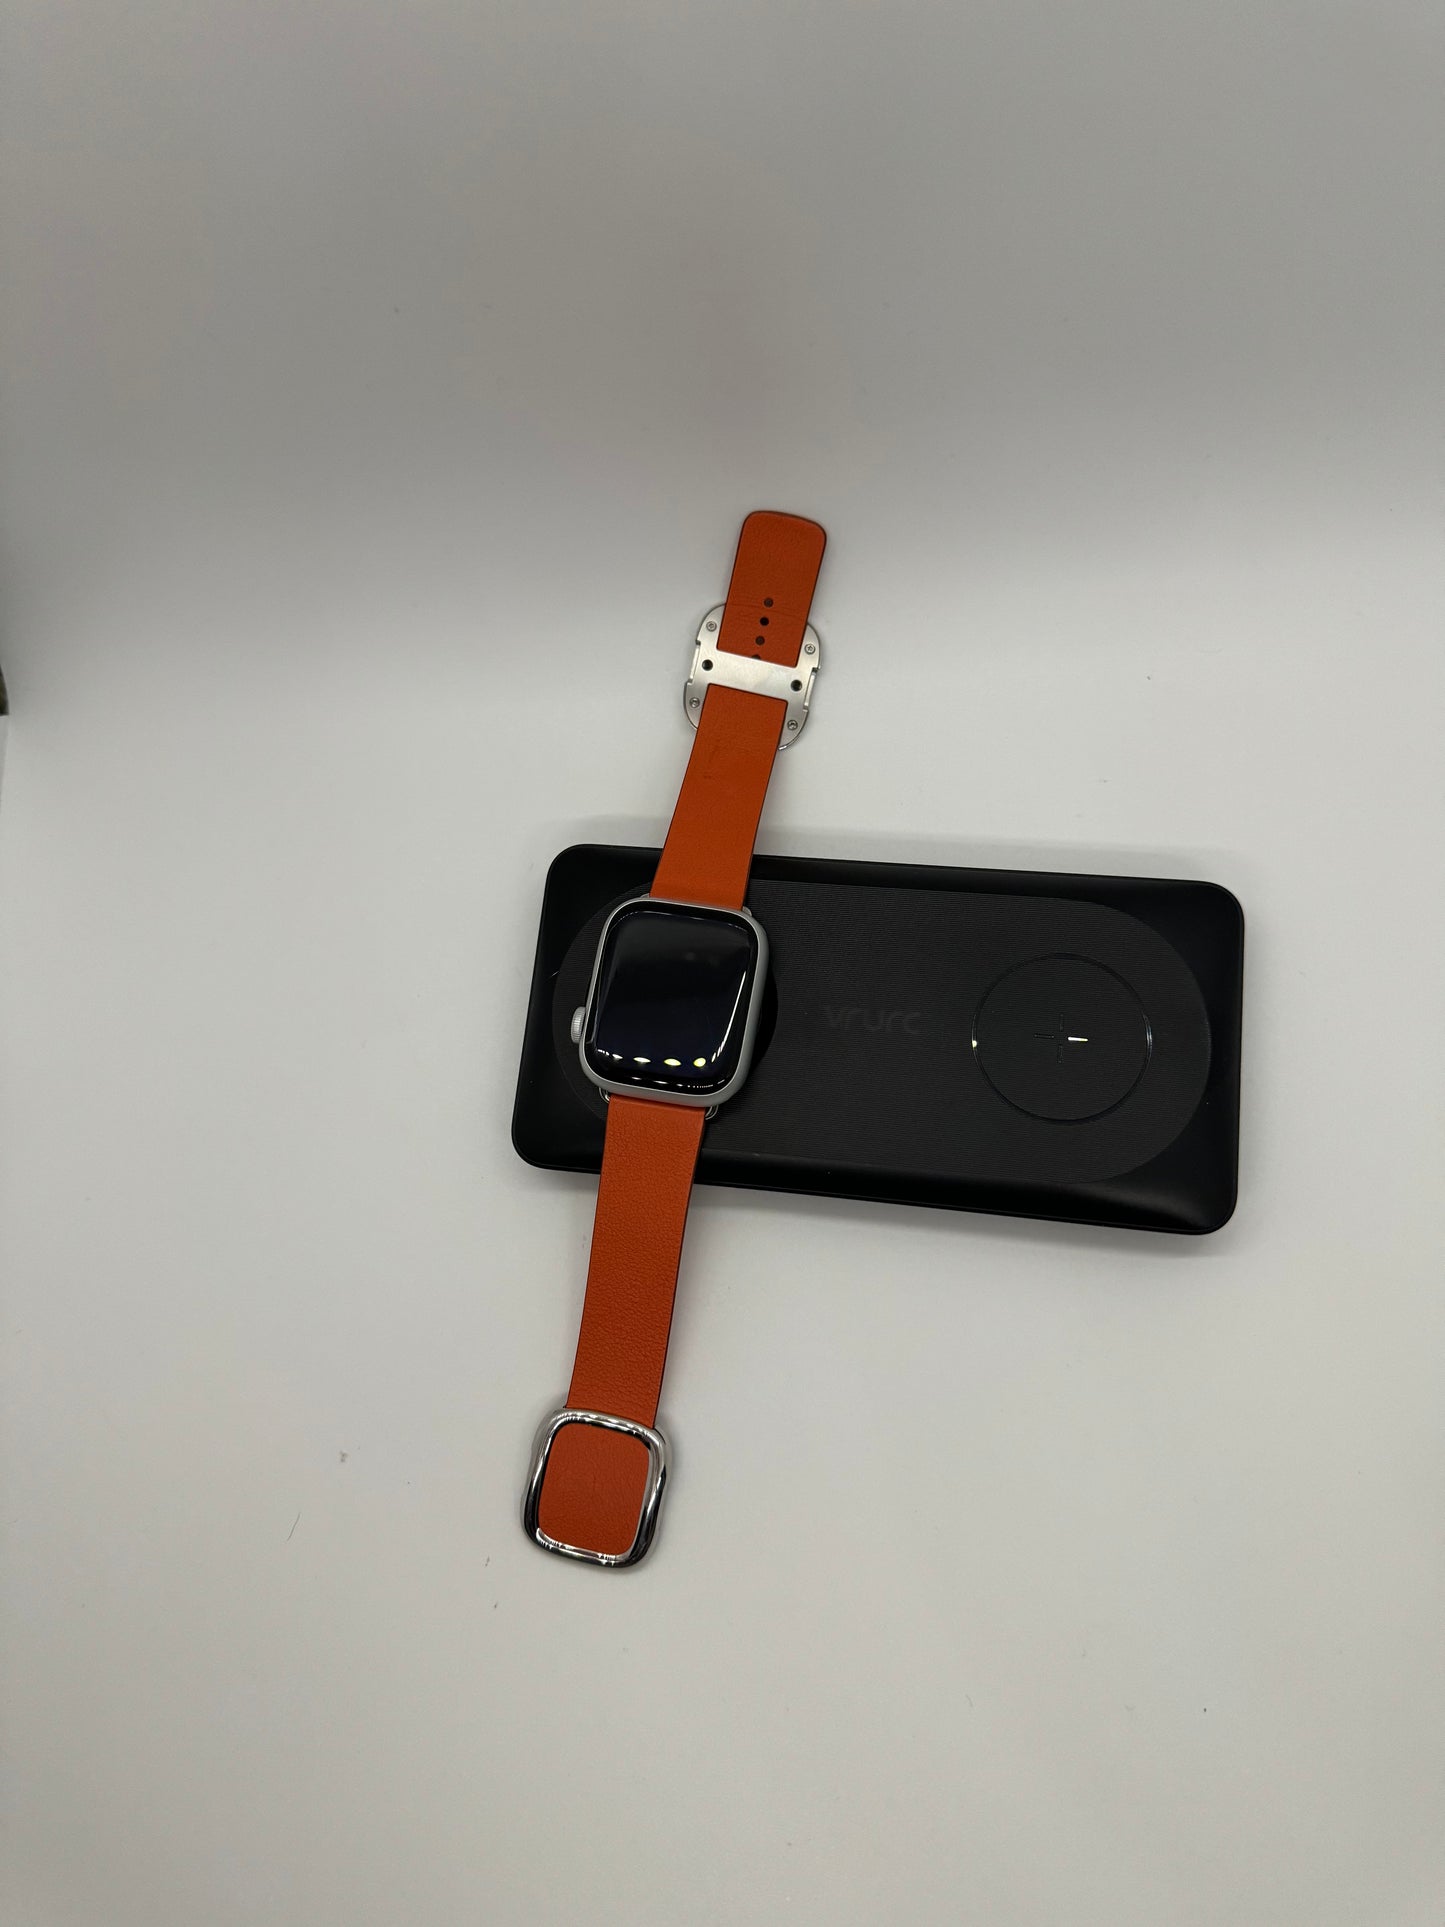 The picture shows a smartwatch with an orange leather strap. The smartwatch is placed on a black rectangular charging pad. The charging pad has a circular indentation where the watch is placed for charging. The watch has a square face with rounded corners and a black screen. The strap has a silver buckle and loops. The background is plain white.